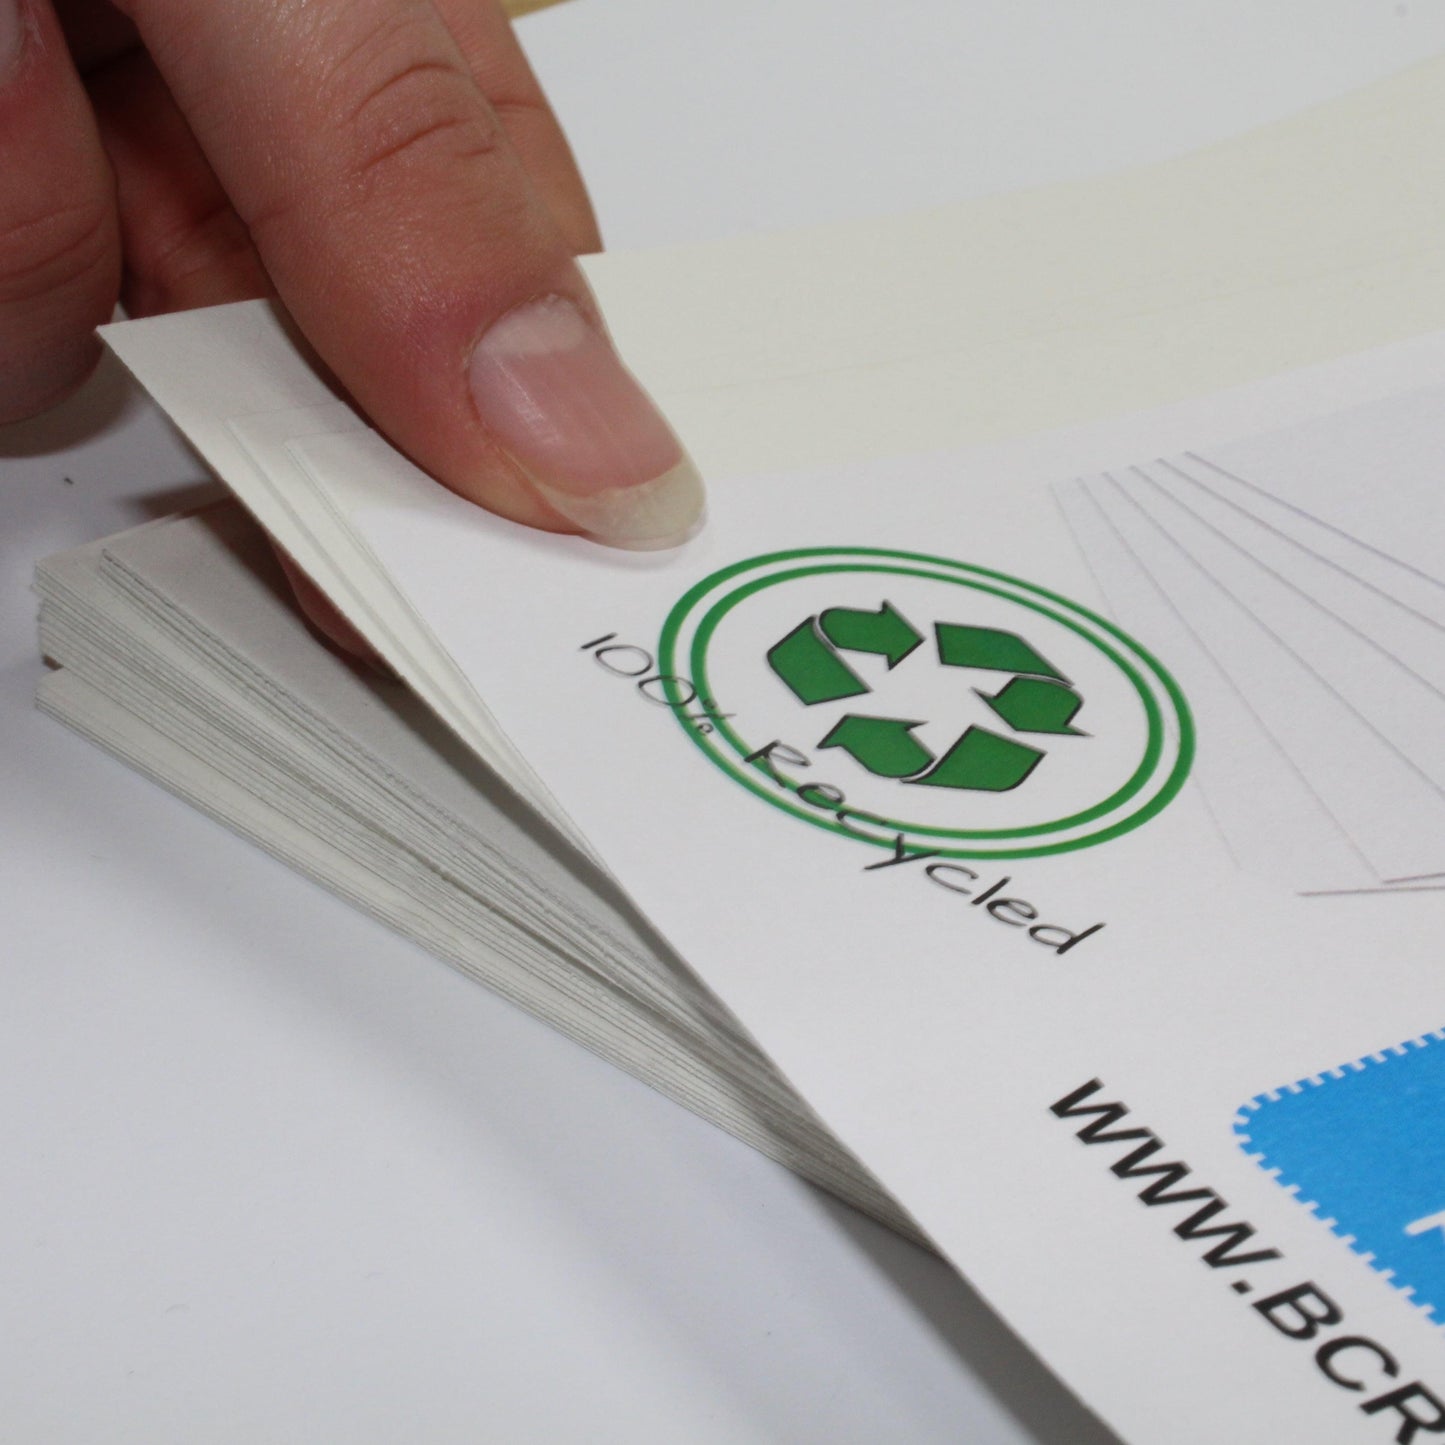 100% Recycled A2 White Card 180gsm Choose Quantity